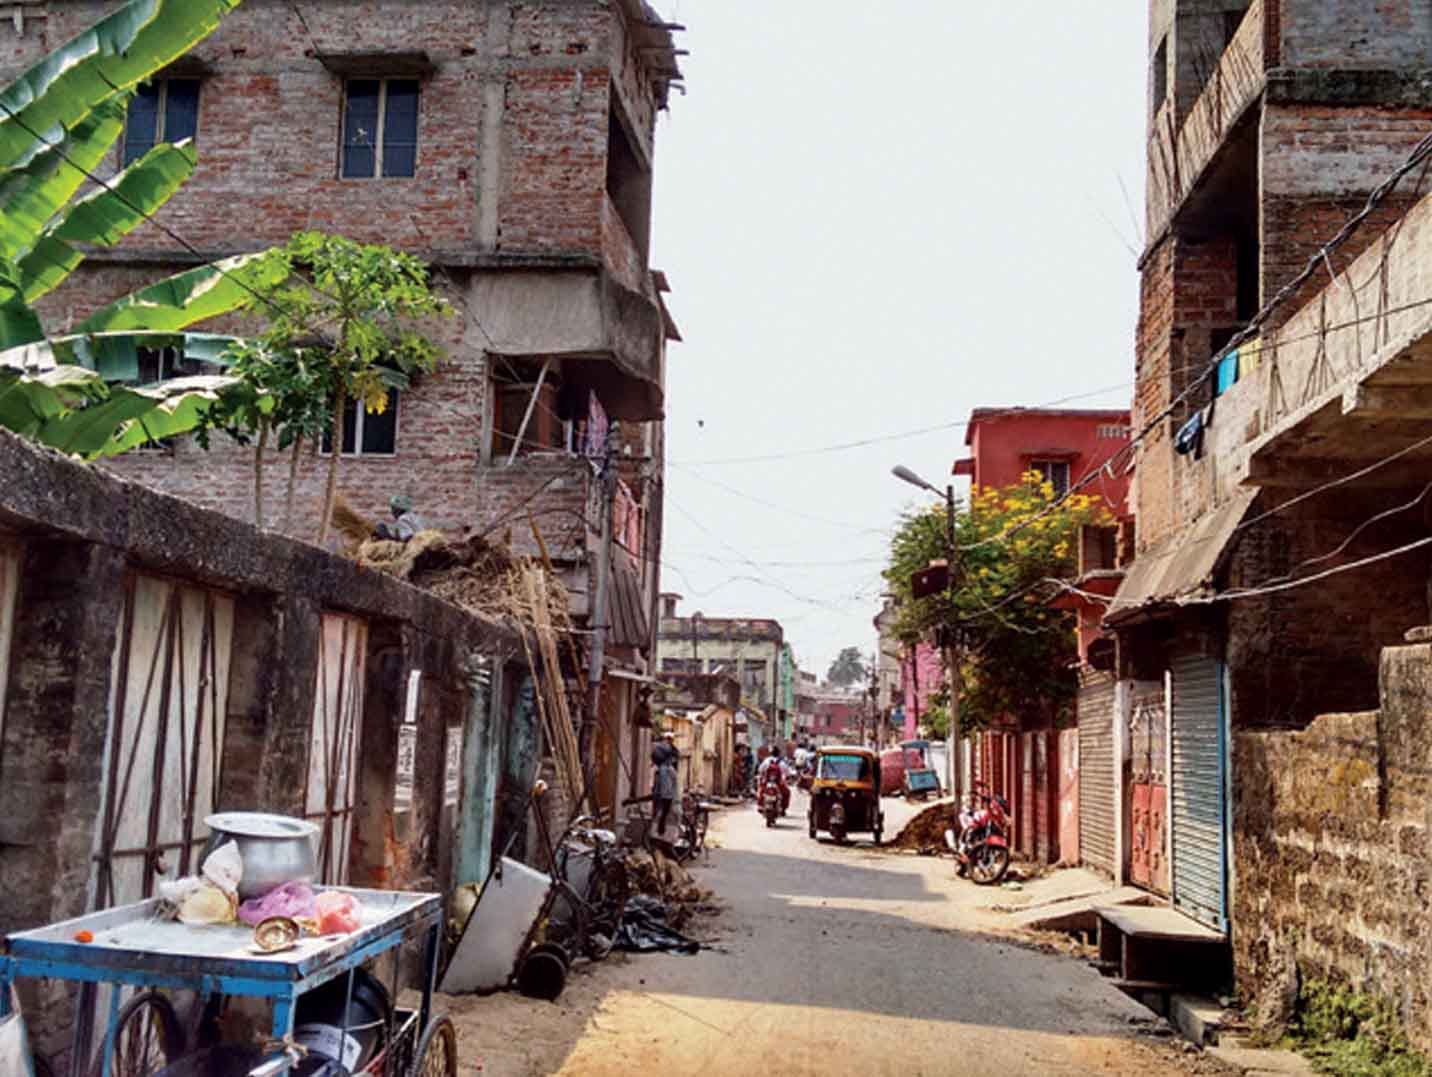 not-all-slums-are-created-equal-informal-settlement-cuttack-mumbai-hyderabad-india